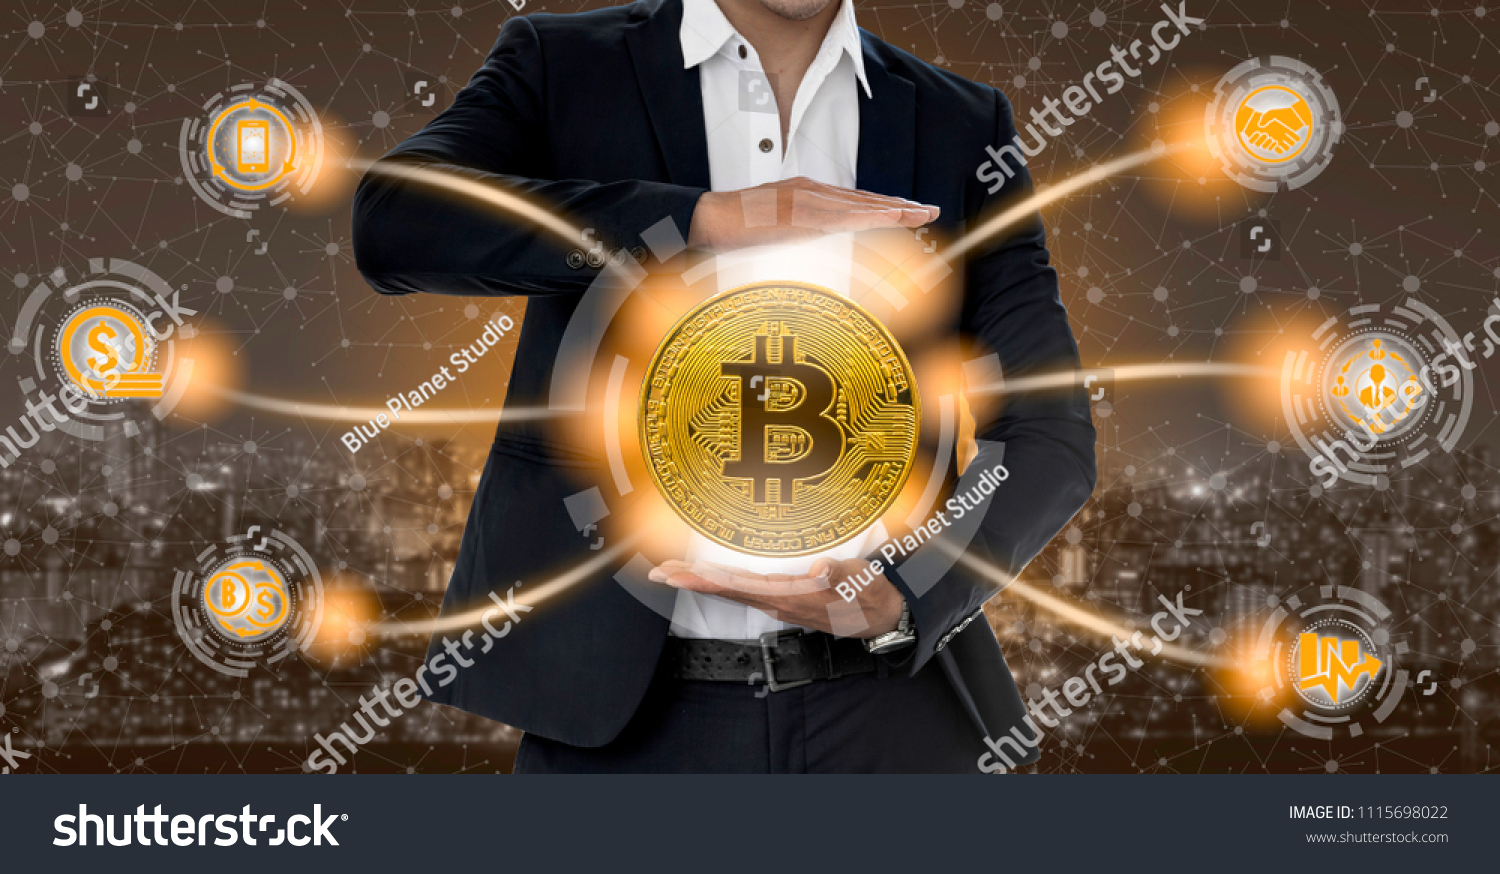 Bitcoin and cryptocurrency investing concept - Businessman holding Bitcoin with mobile application business icons showing exchanging, trading, transfer and investment of blockchain technology. #1115698022